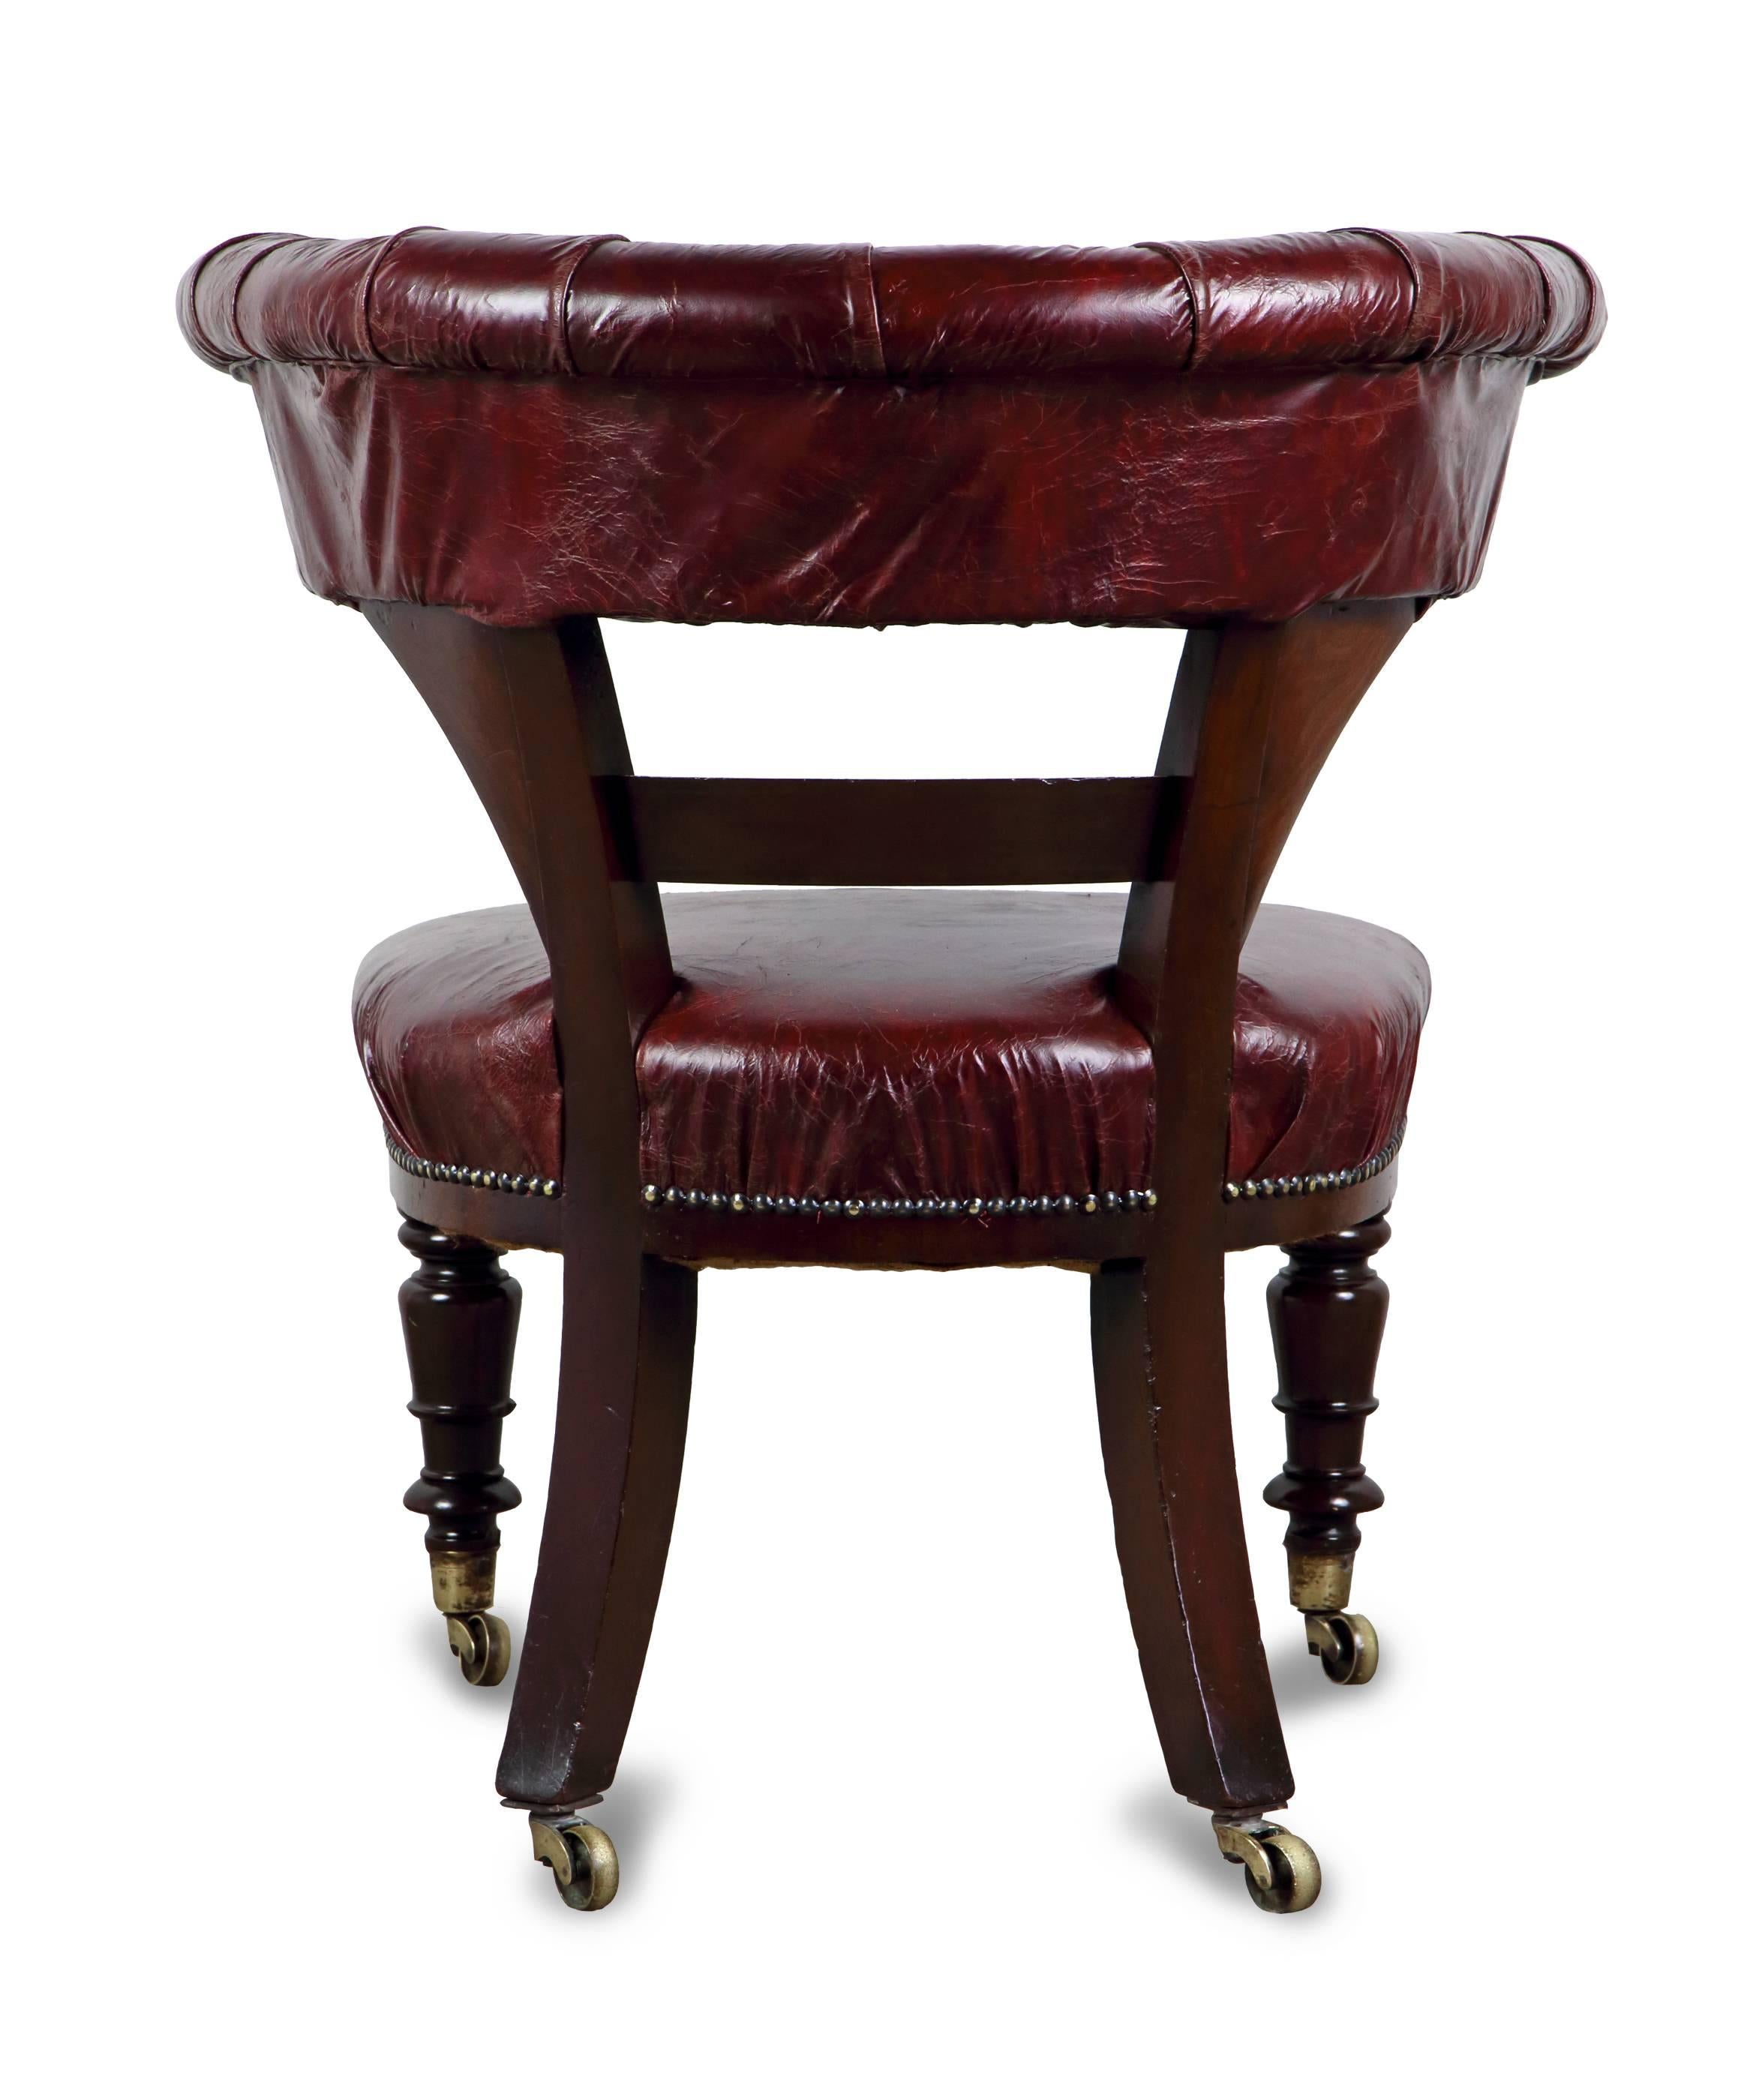 19th Century Mahogany and Leather Upholstered 'Horseshoe' Desk or Library Chair